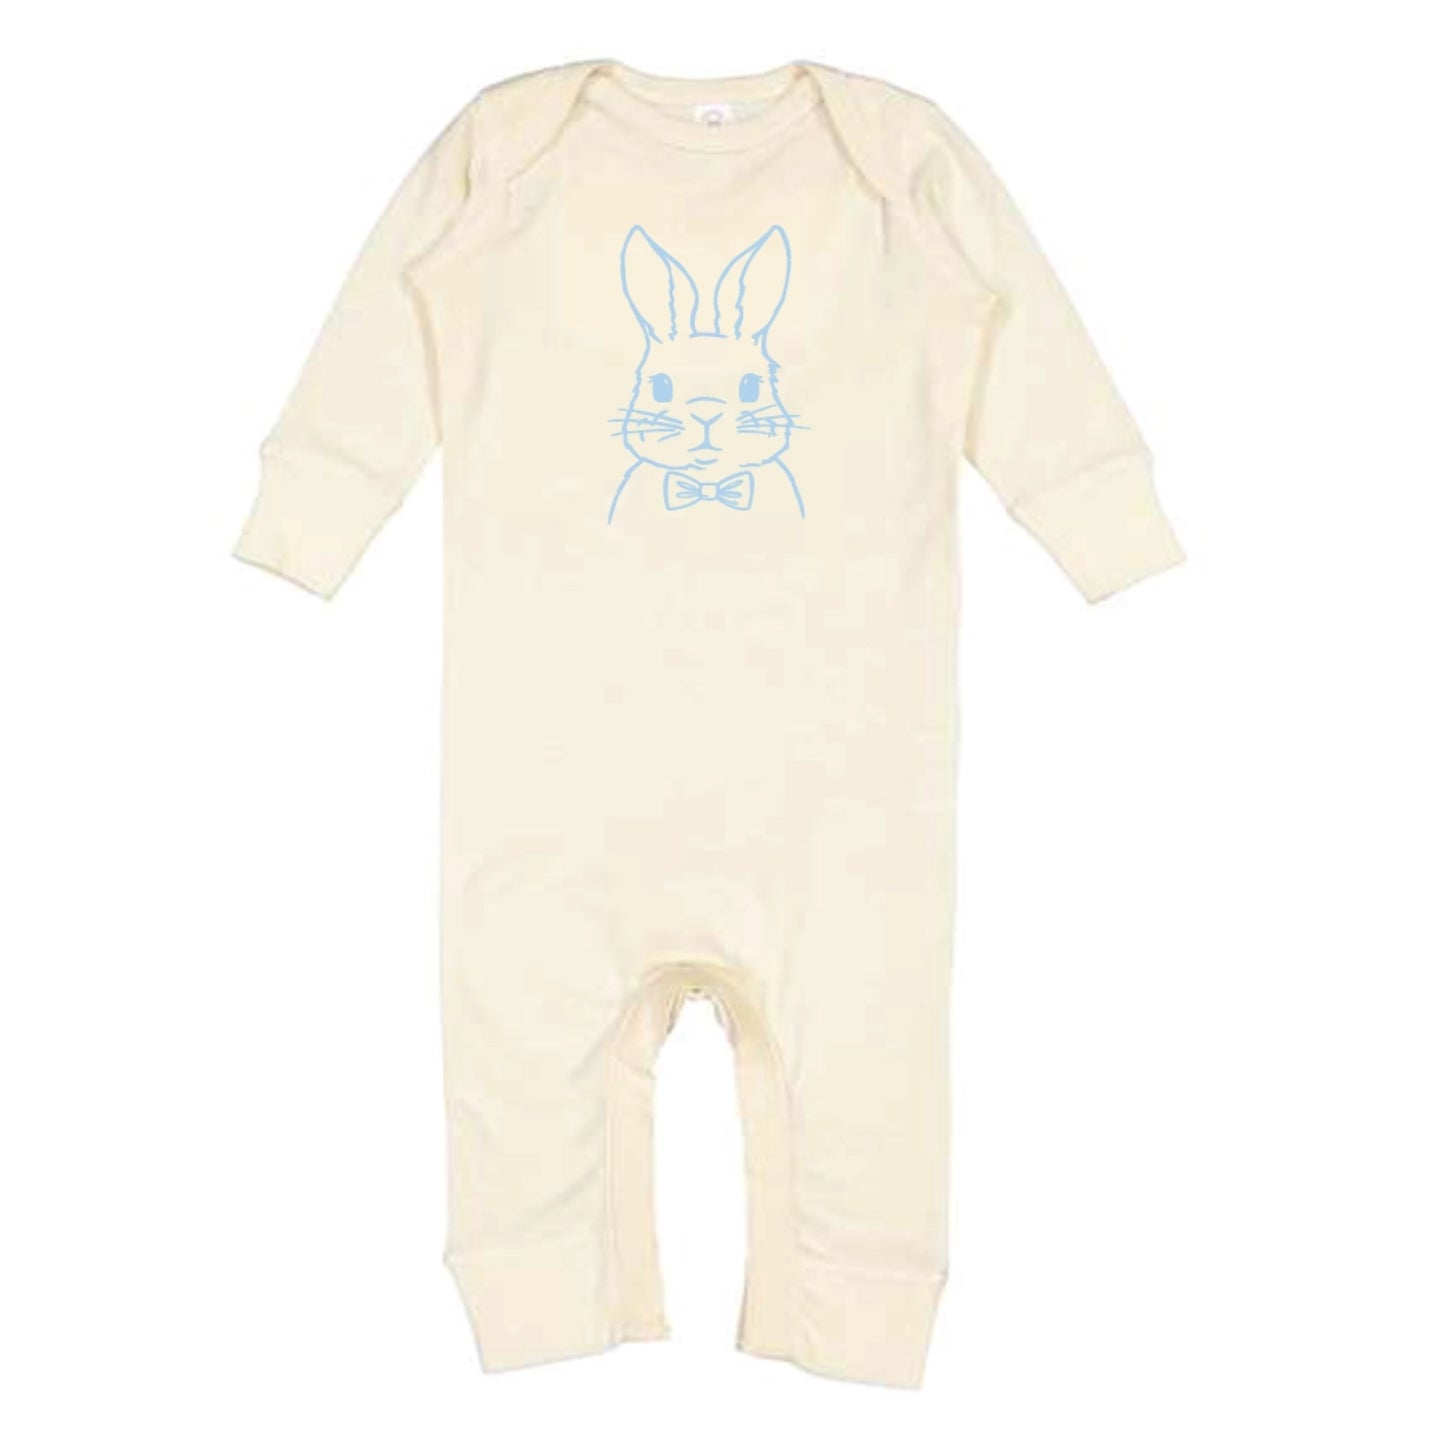 Blue Bunny Graphic Bodysuit in Natural